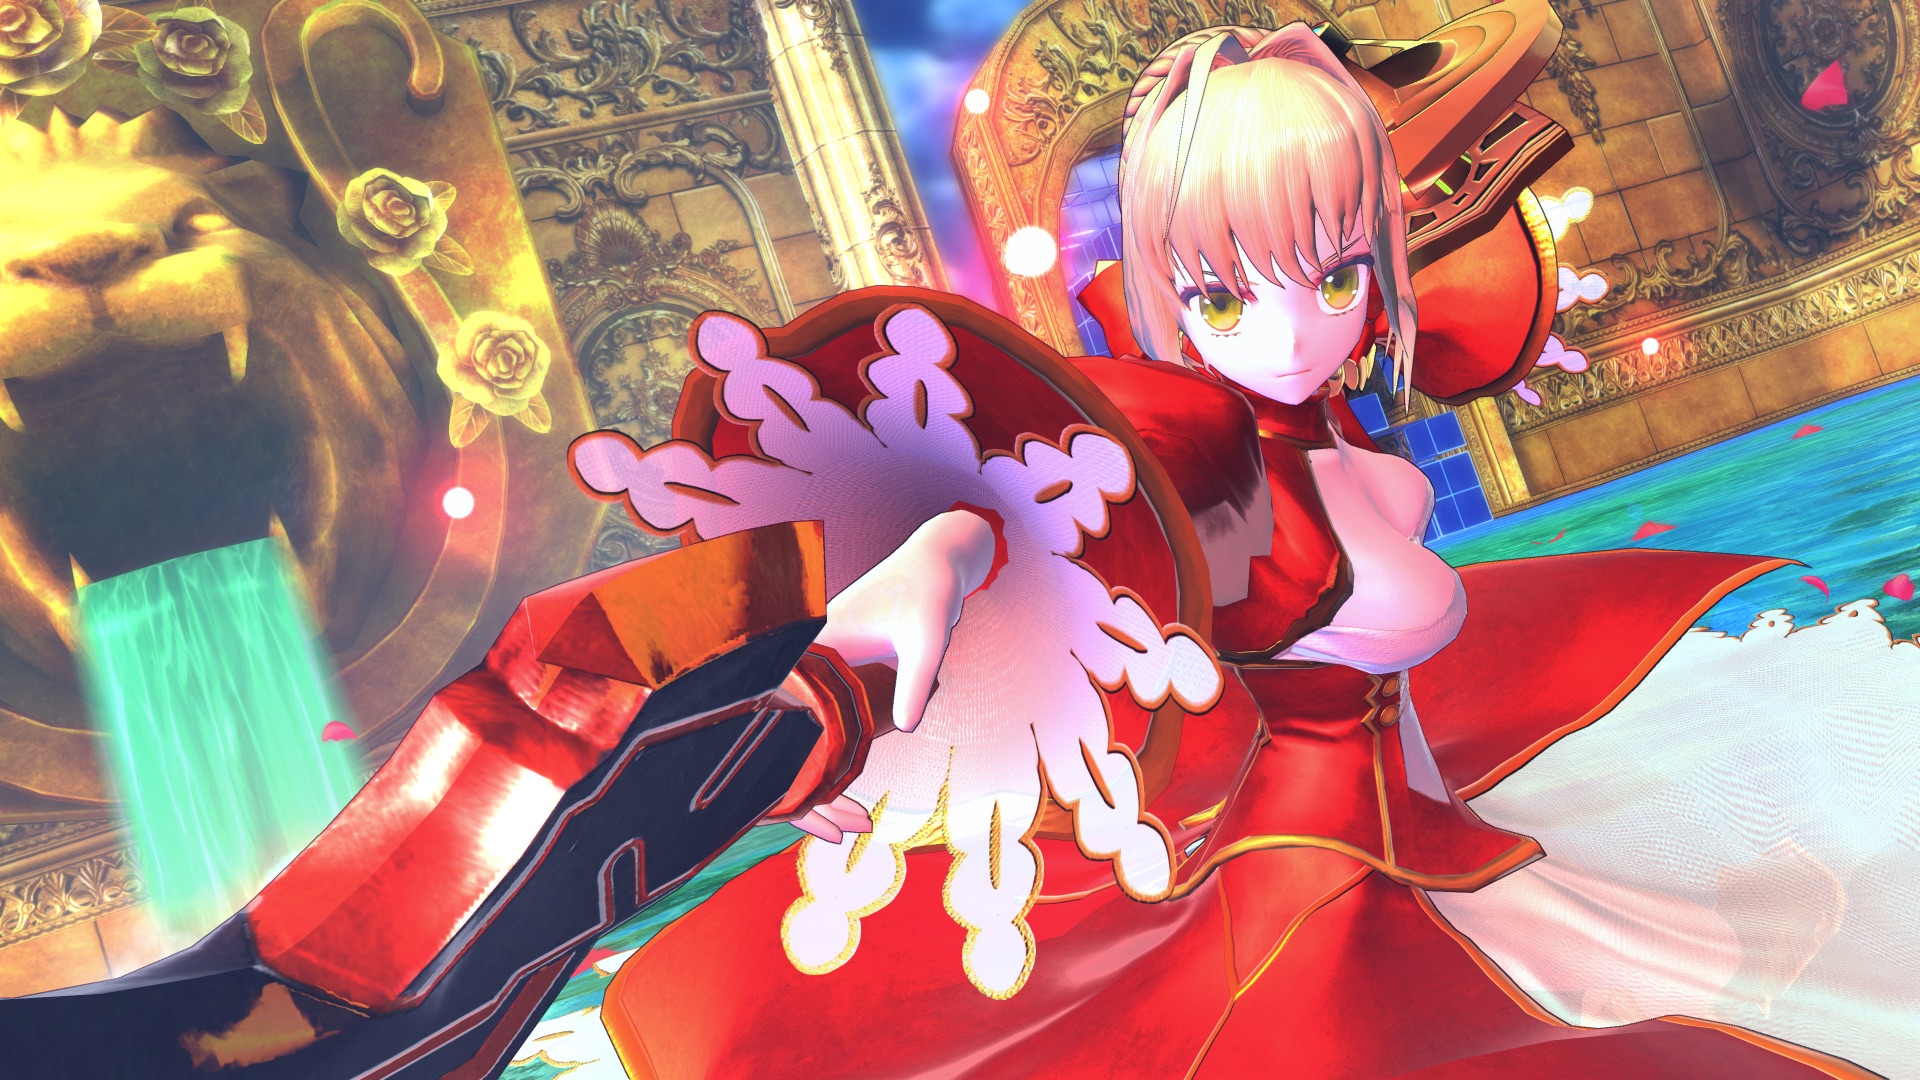 Fate_extella_ The Umbral Star Nero_05